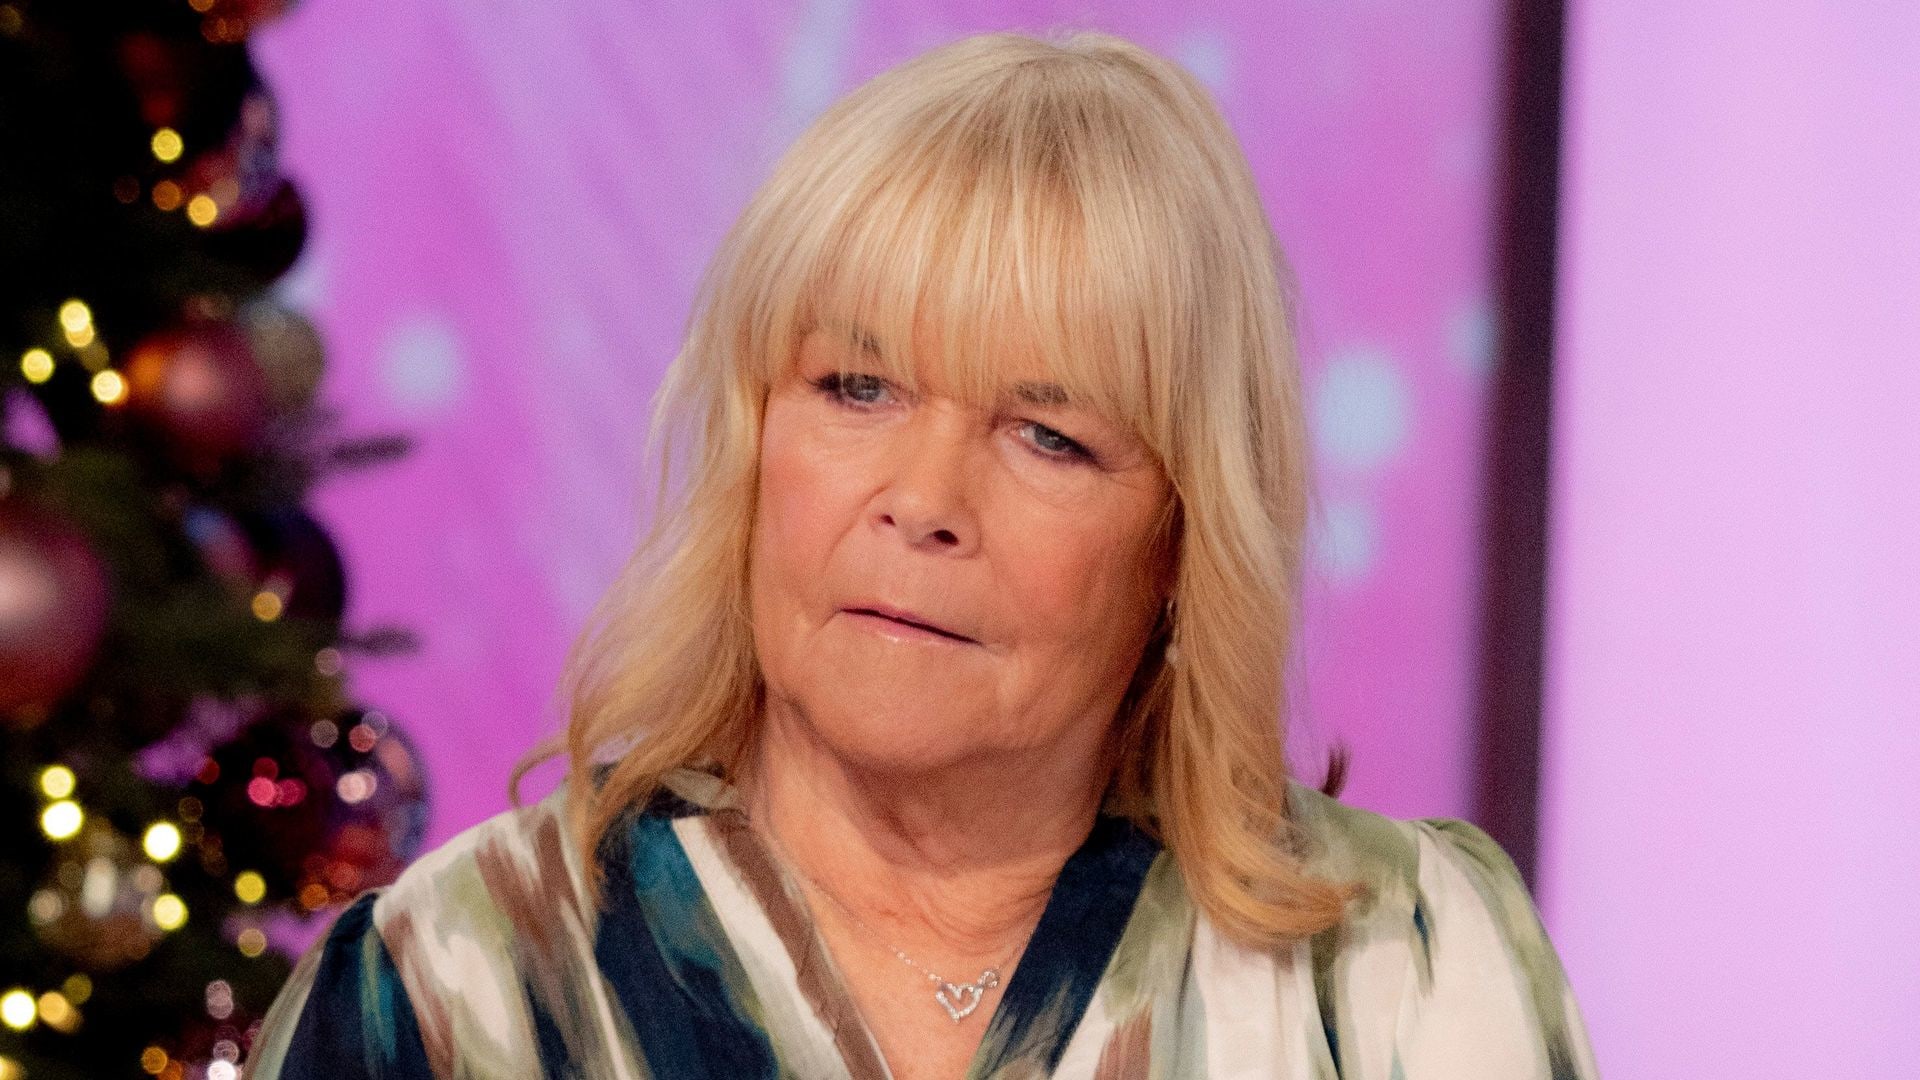 Linda Robson in patterned shirt